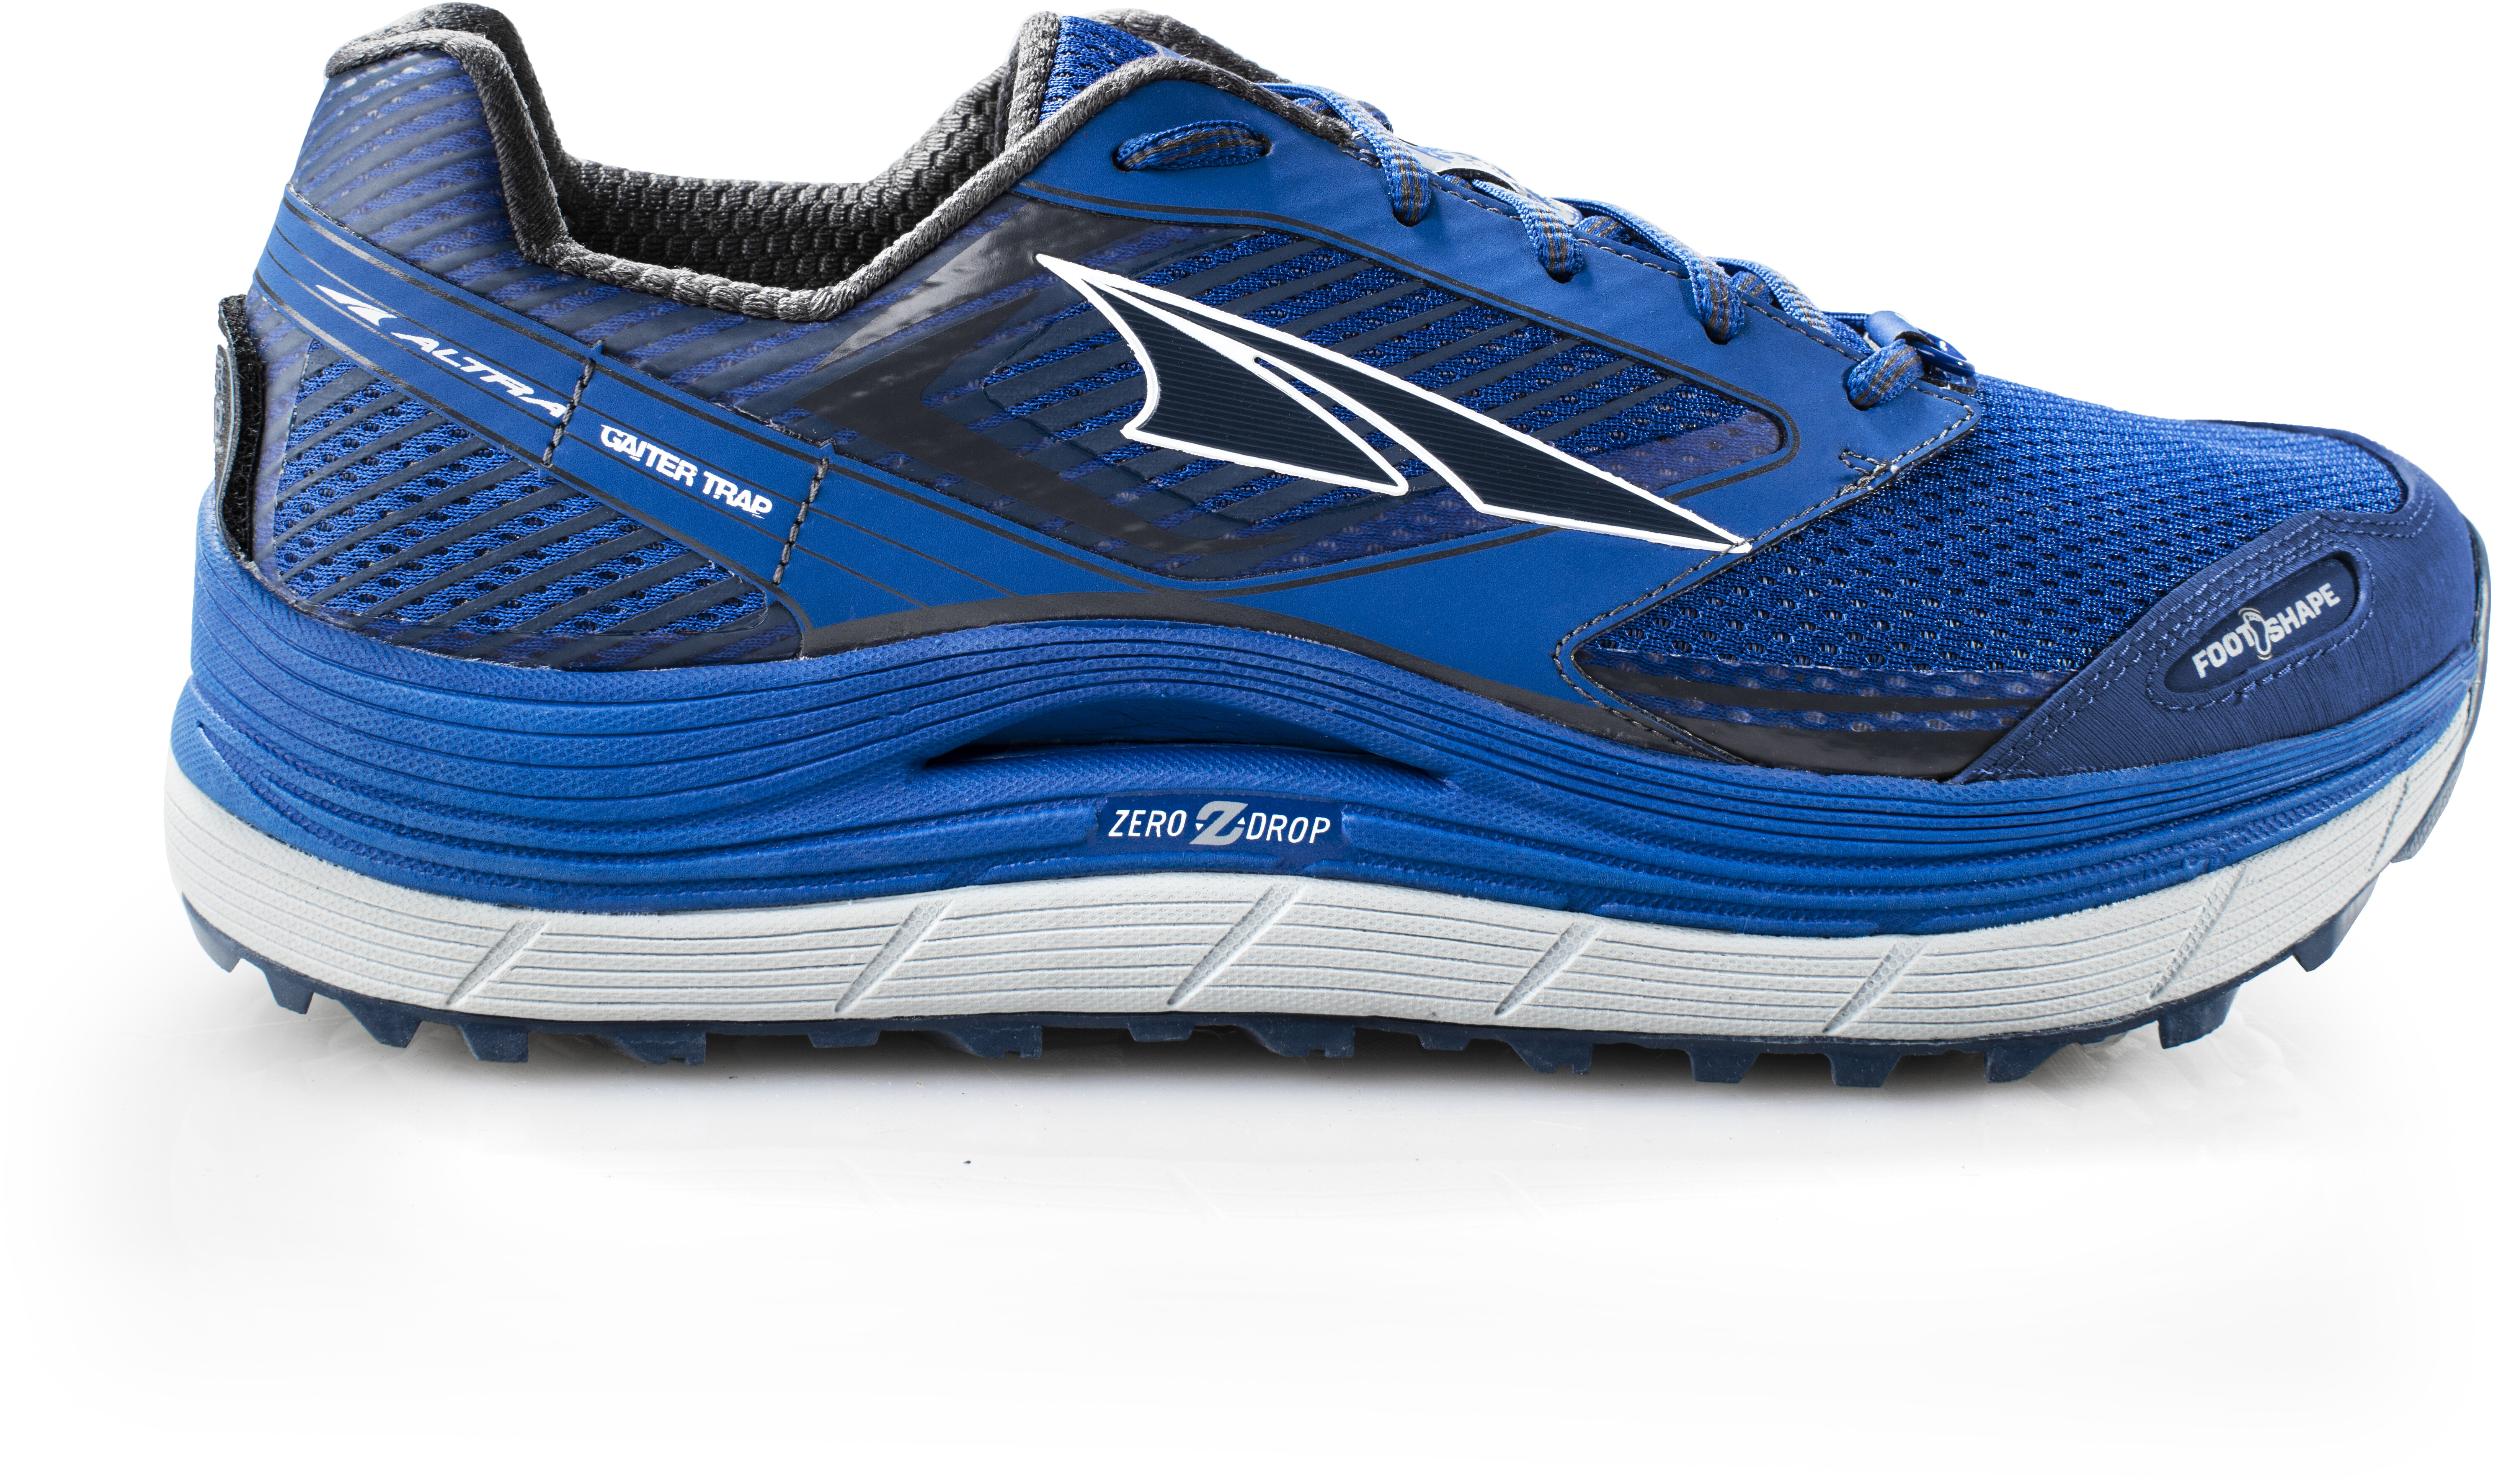 Altra Olympus 2.5 Trail Running Shoes Men Blue online